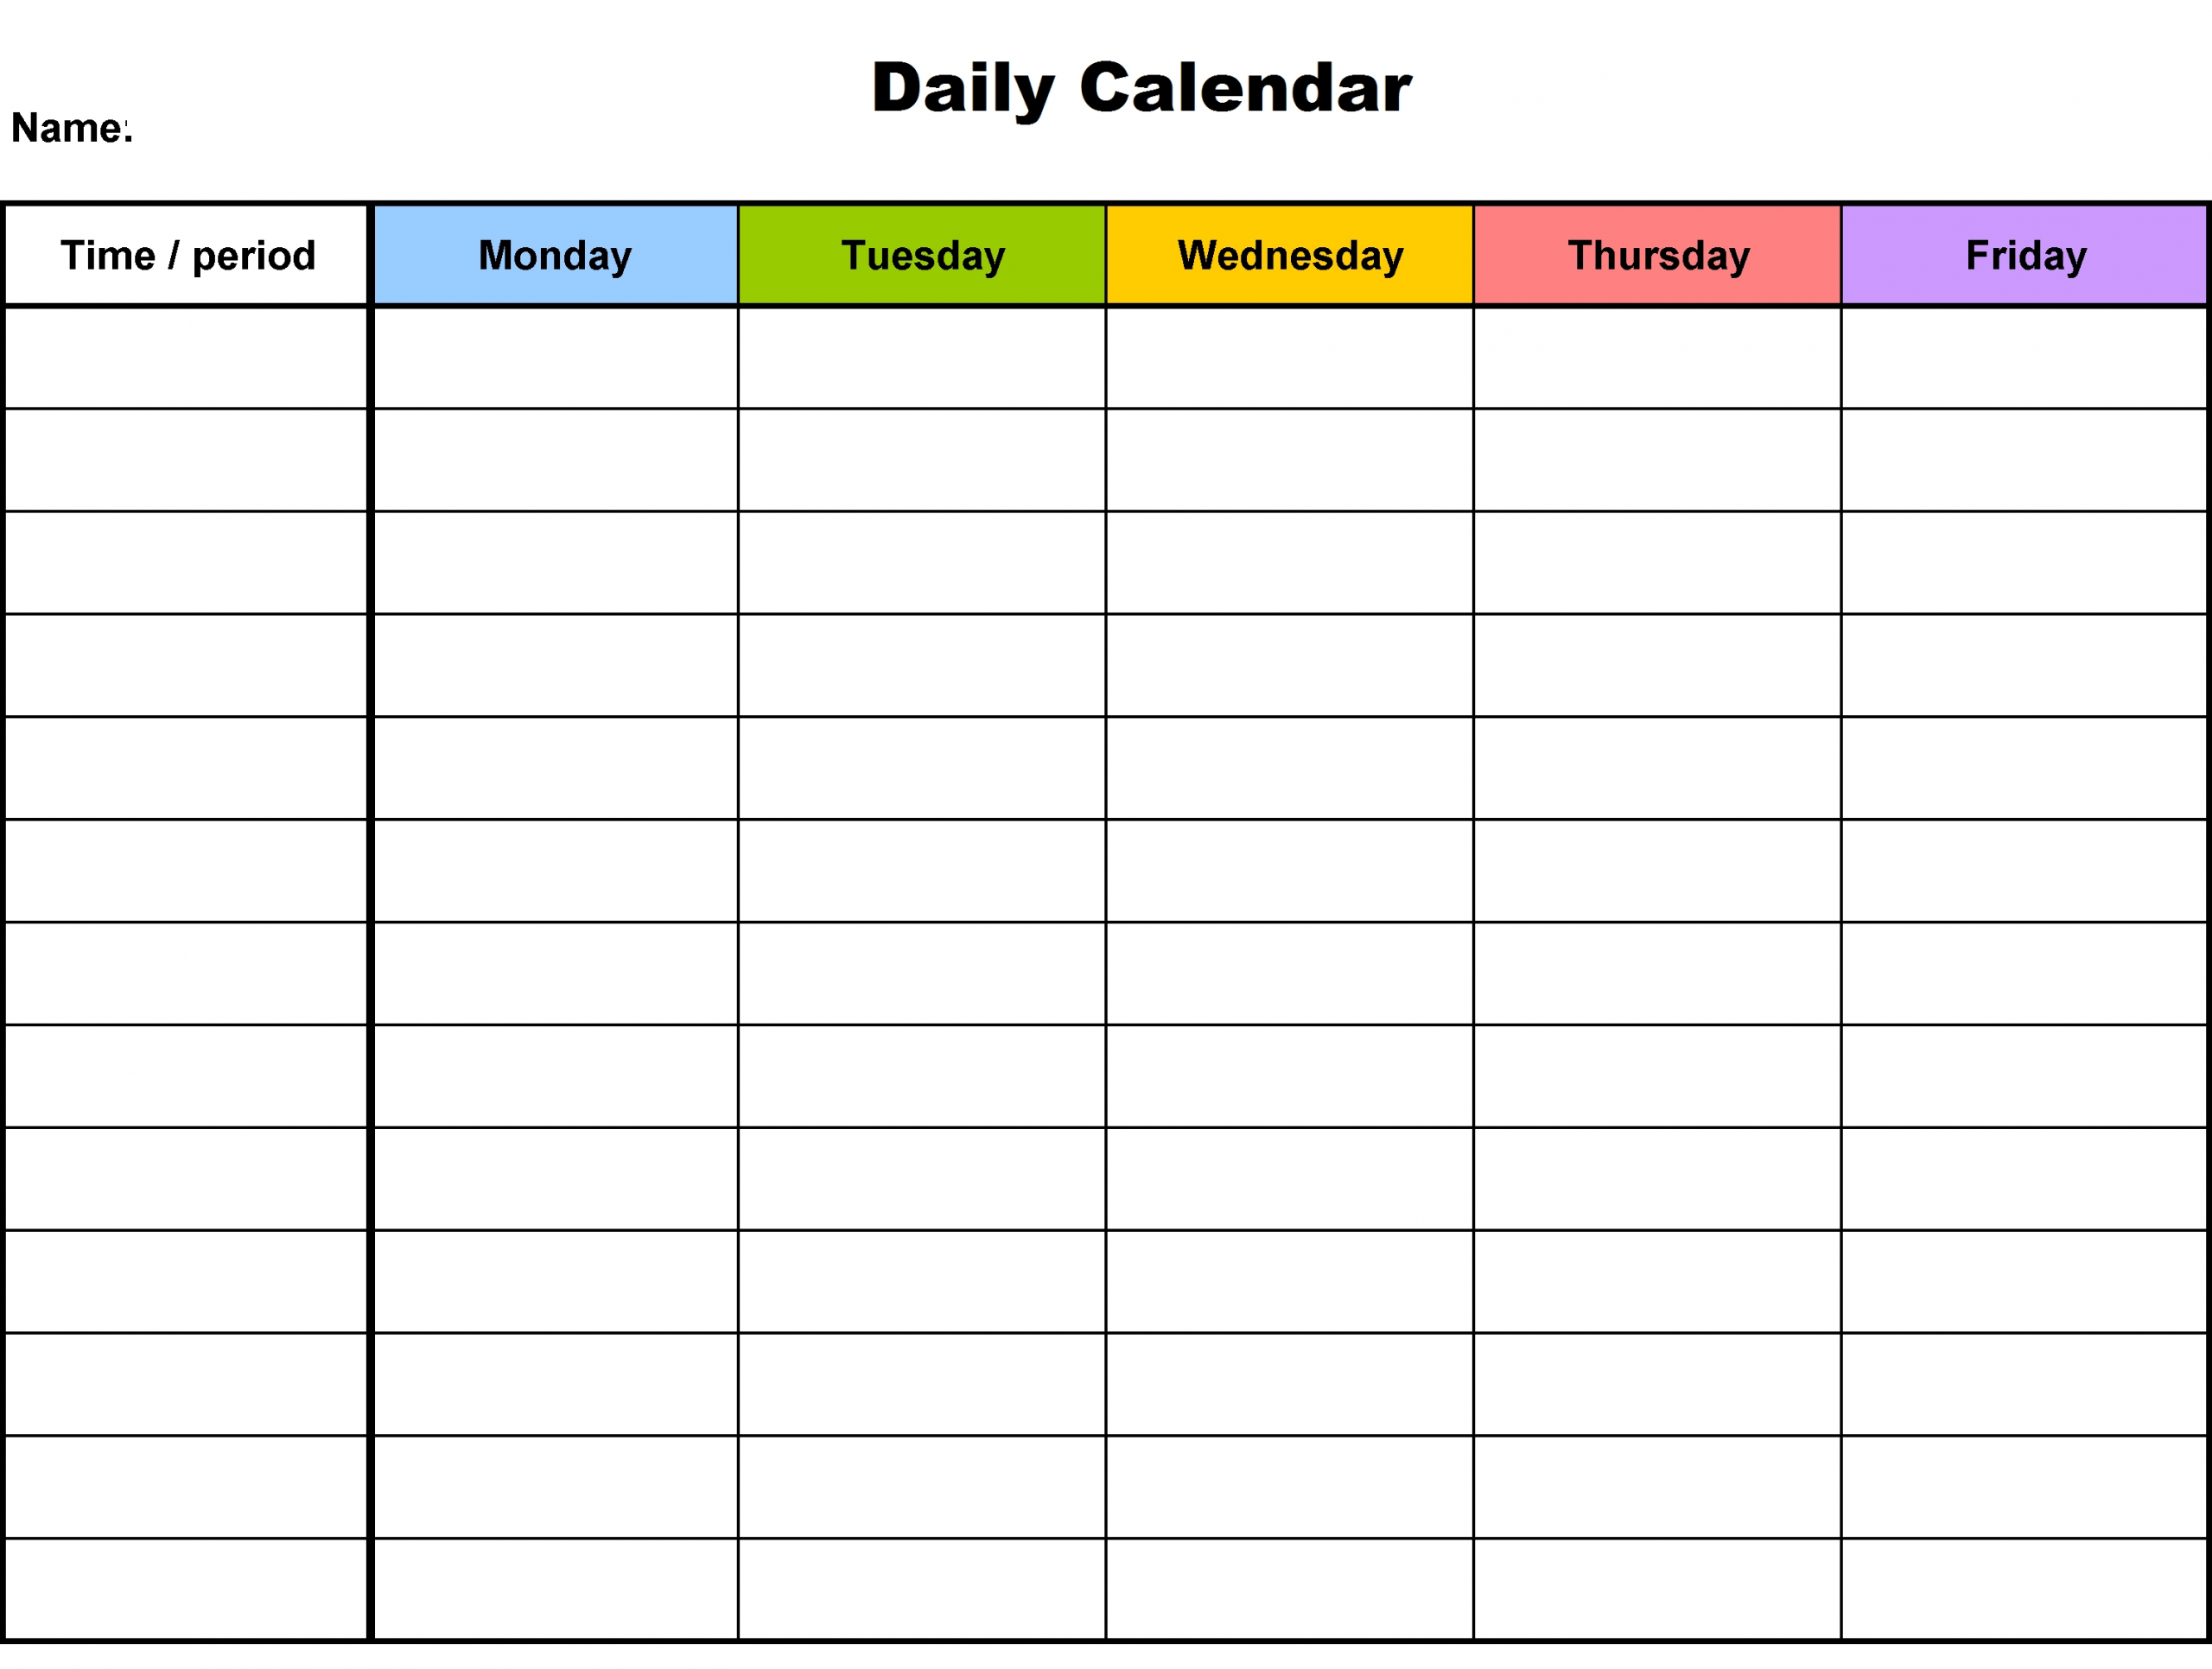 Daily Blank Calendar Template | Daily Schedule Template